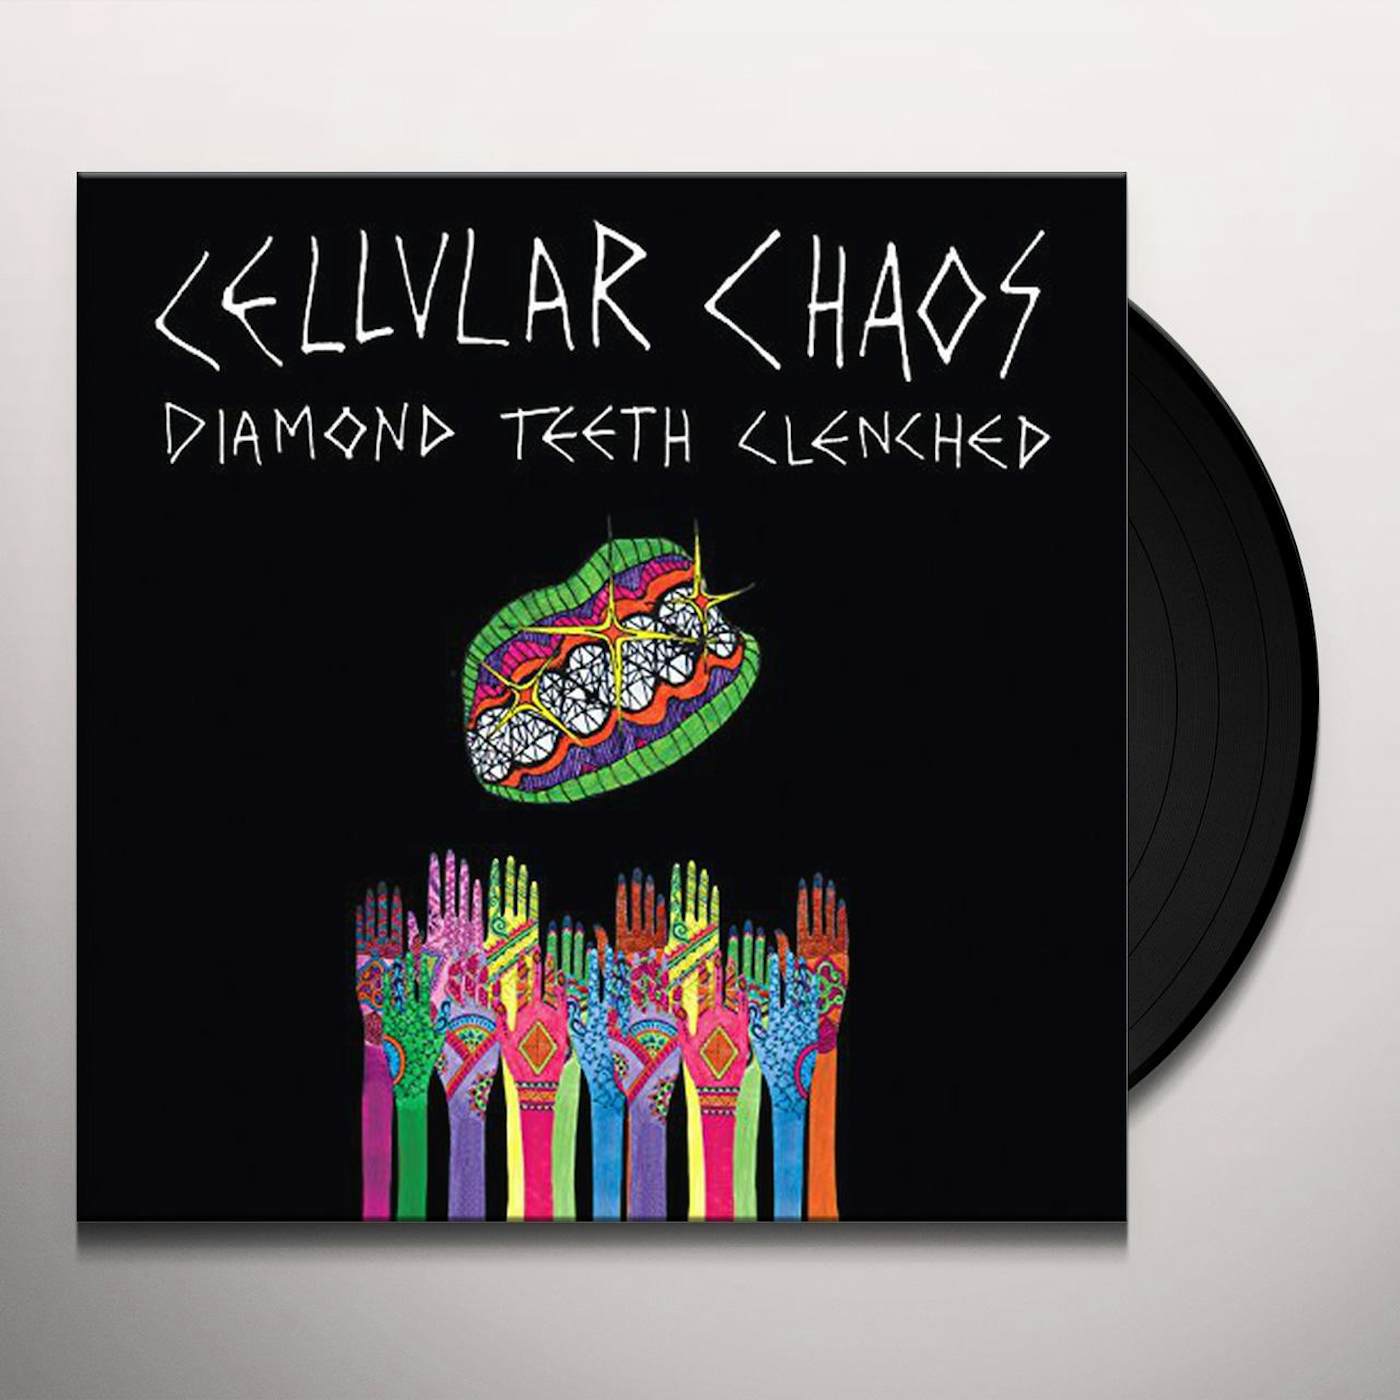 Cellular Chaos Diamond Teeth Clenched Vinyl Record